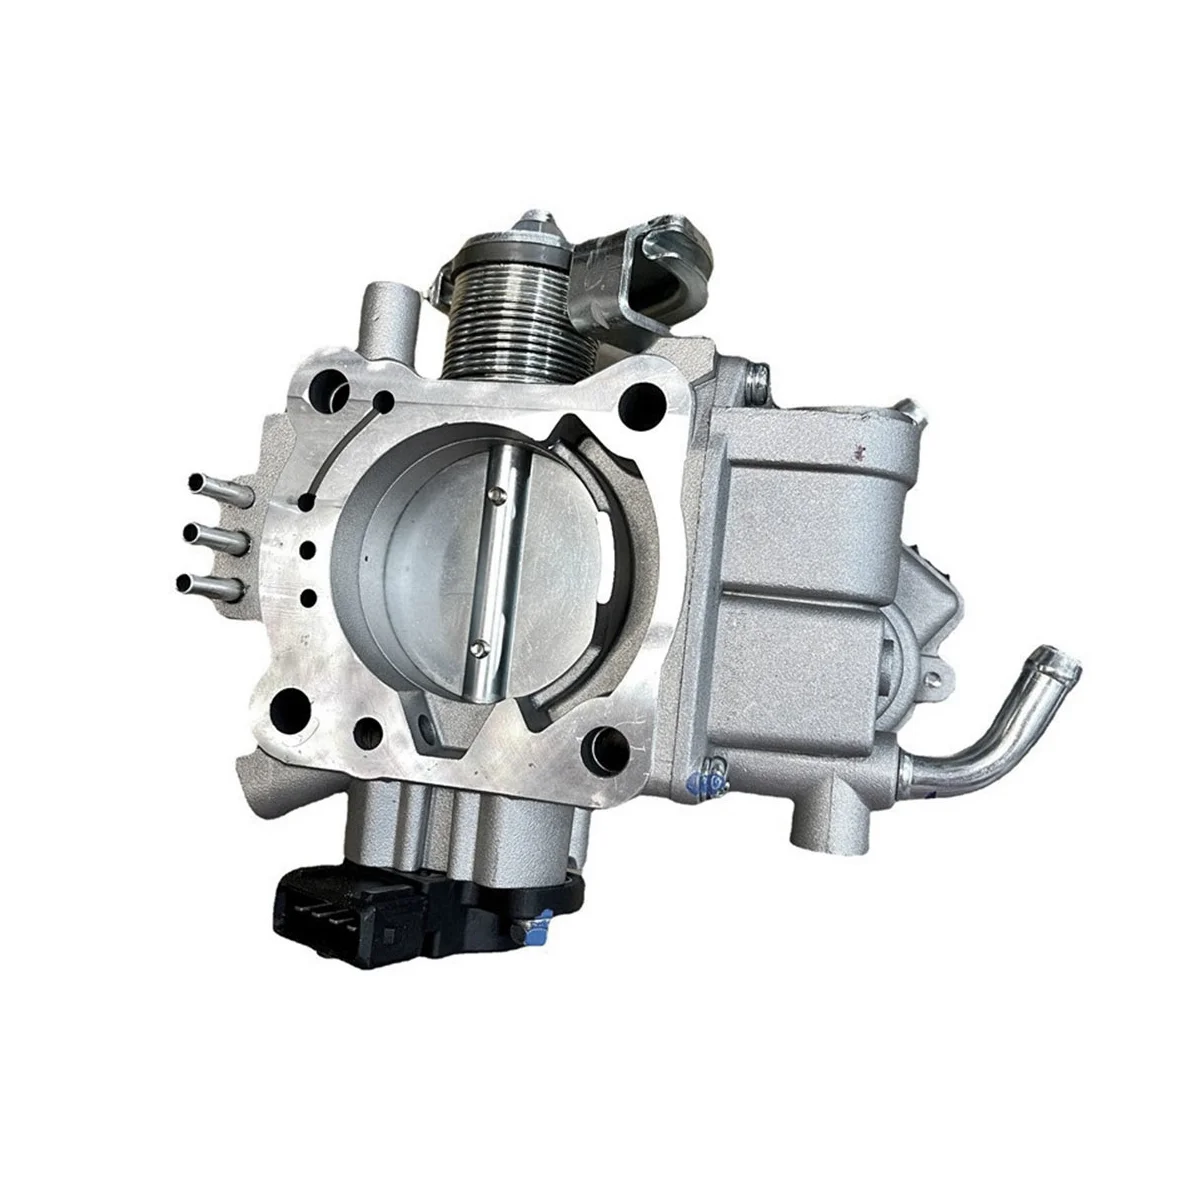 

Auto Throttle Body Assembly for Mitsubishi Galant 2.0L 2WD Engine Code 4G64 4G63 MR579011 MD338428 SMR579011